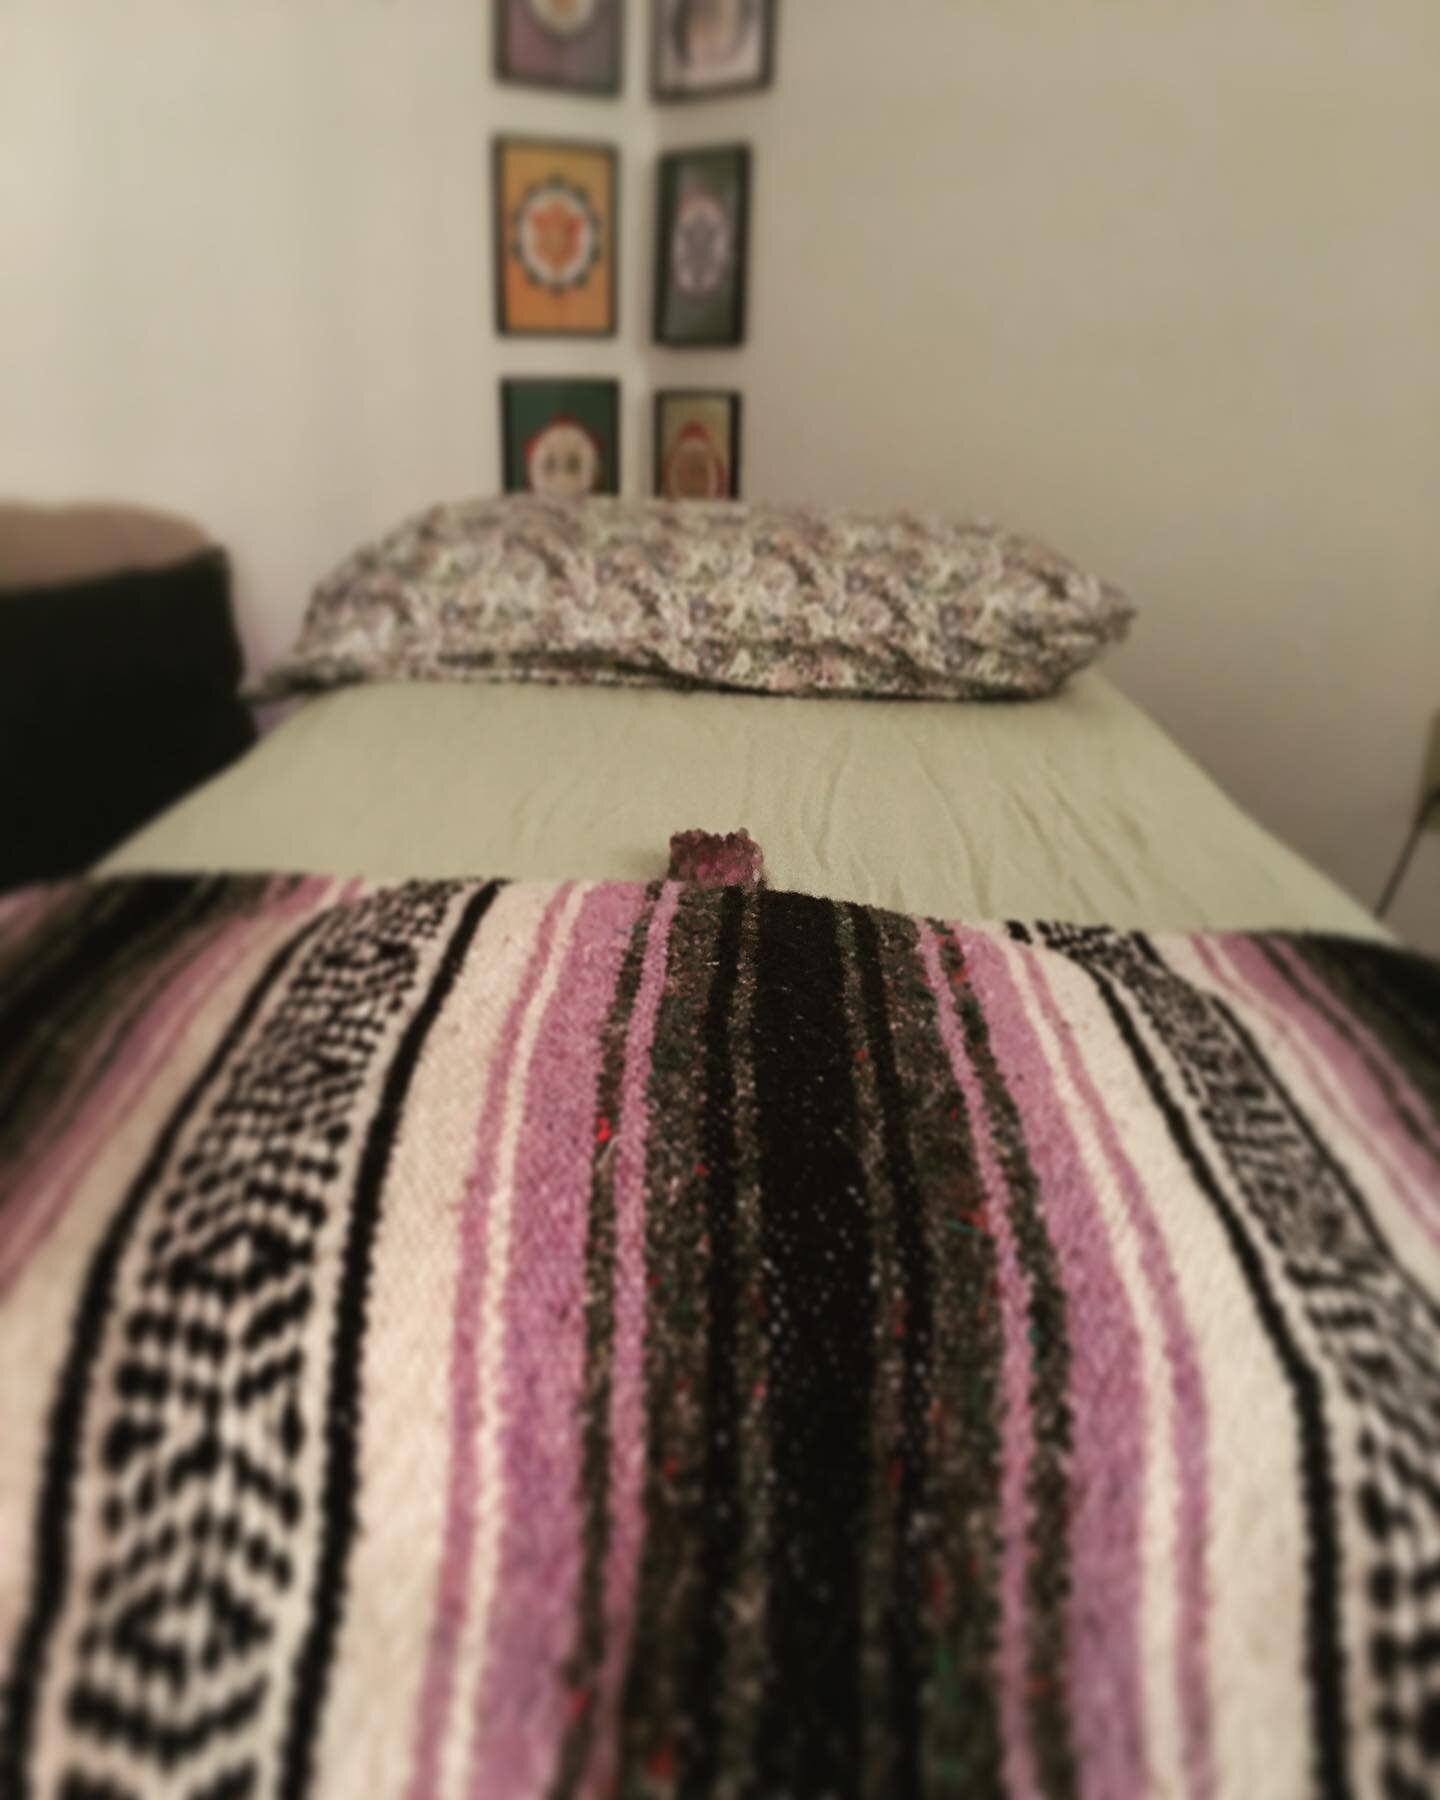 View from the table....Chakra art in the frames. Amethyst charging before polarity therapy session. Pillow to support the knees or feet.✨ #elementalrootsgnv #massagetherapy #polaritytherapy #gongbaths #yoga #meditation #thaimassage #houseofyingnv